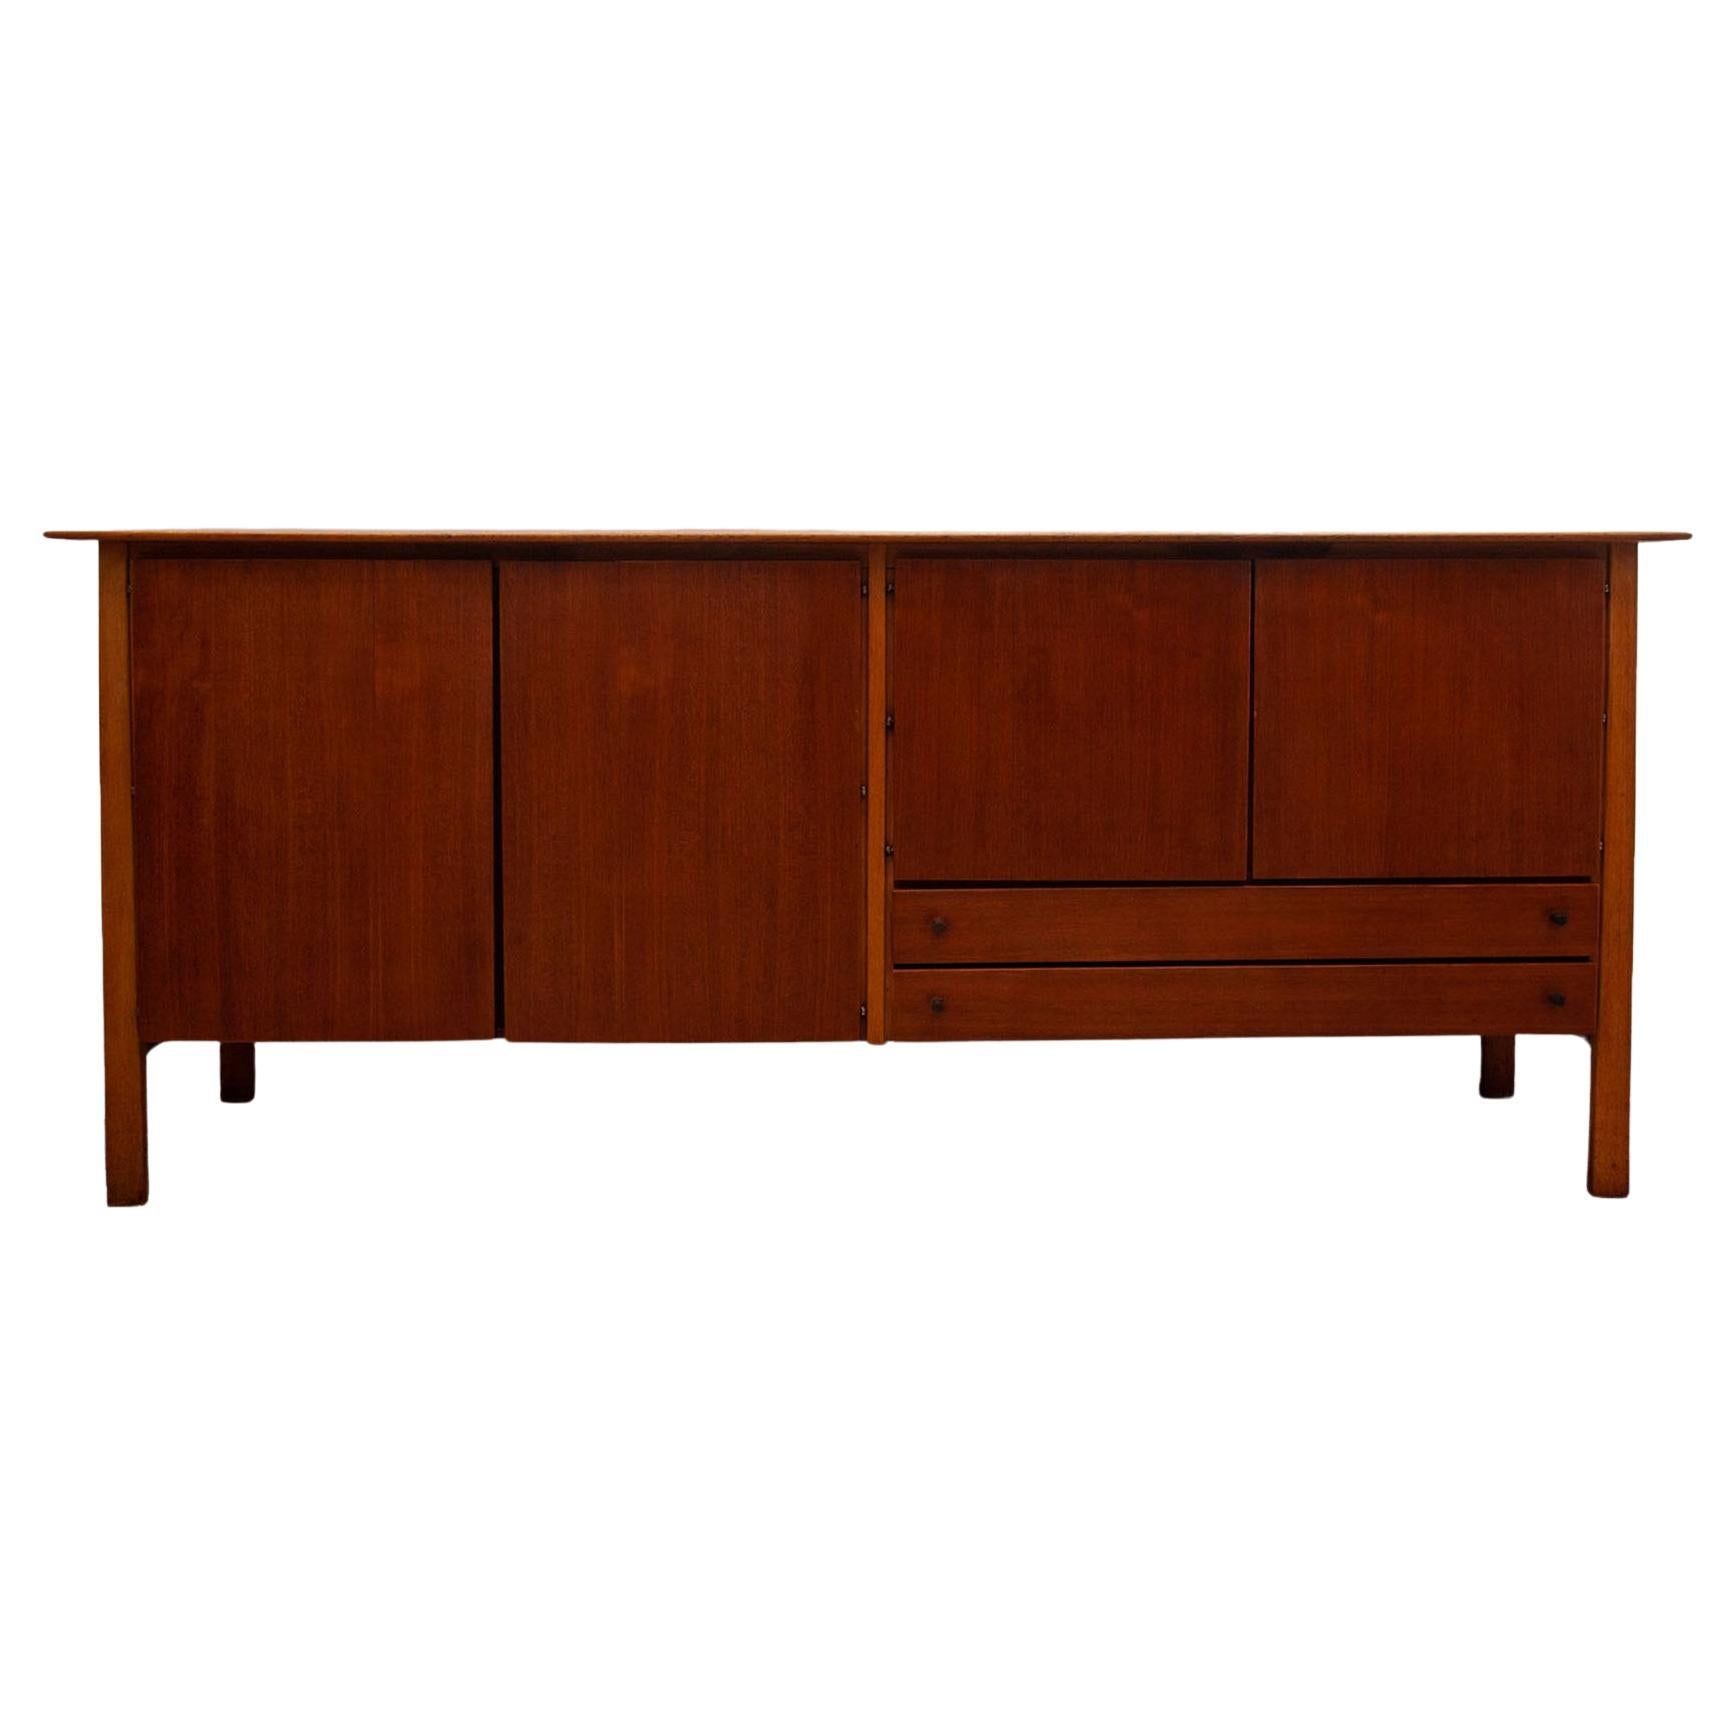 Large High Teak Sideboard with Floating Top 1950s, Made in Denmark